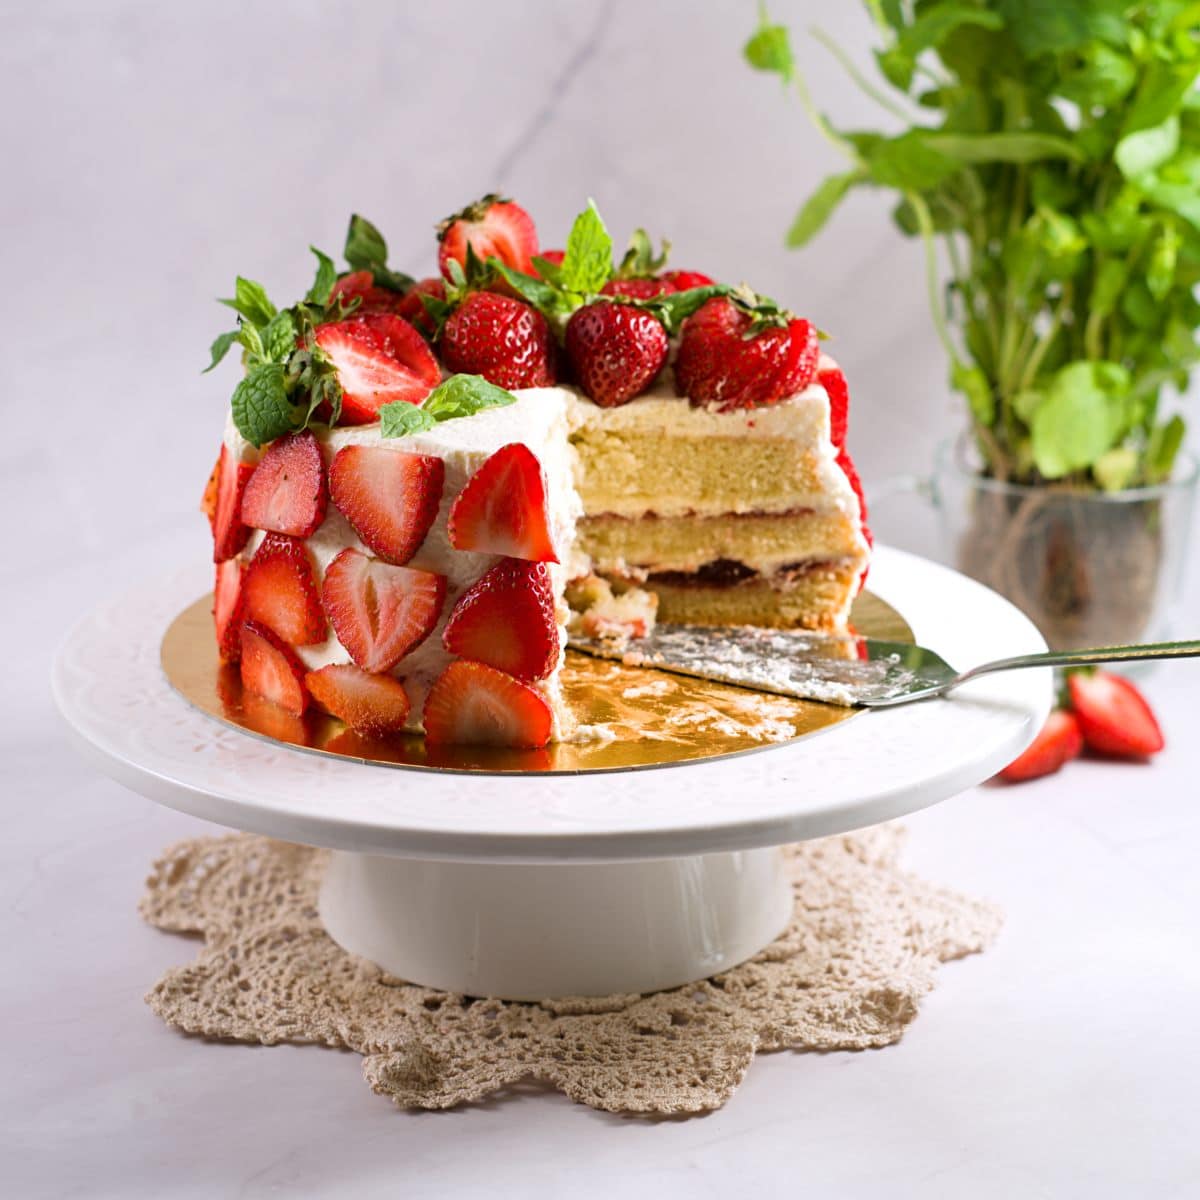 How to strawberry cake decor with fresh strawberries